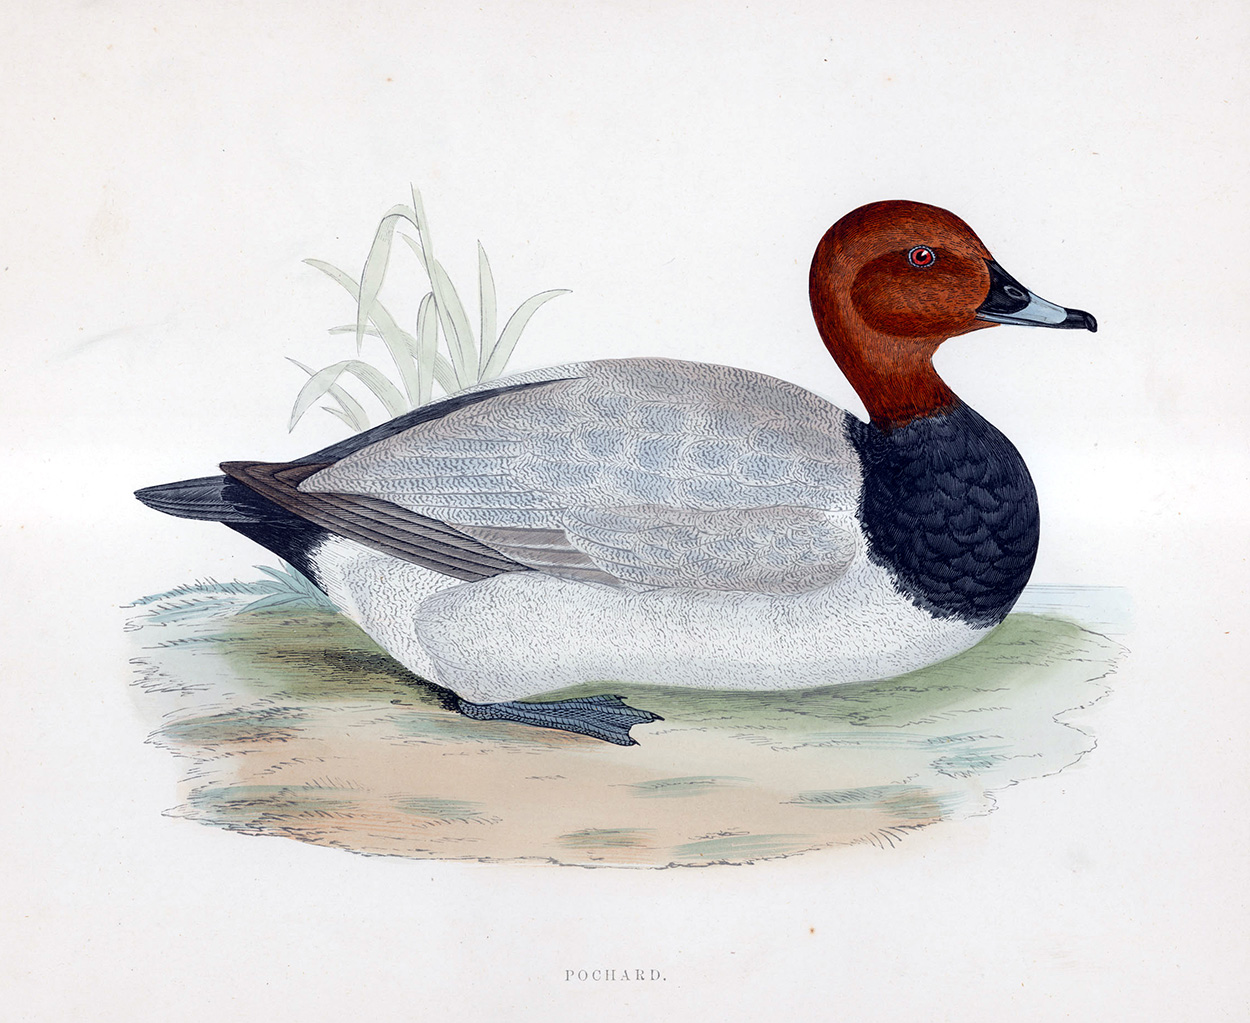 Pochard - hand coloured lithograph 1891 (Print) art by Beverley R Morris at The Illustration Art Gallery